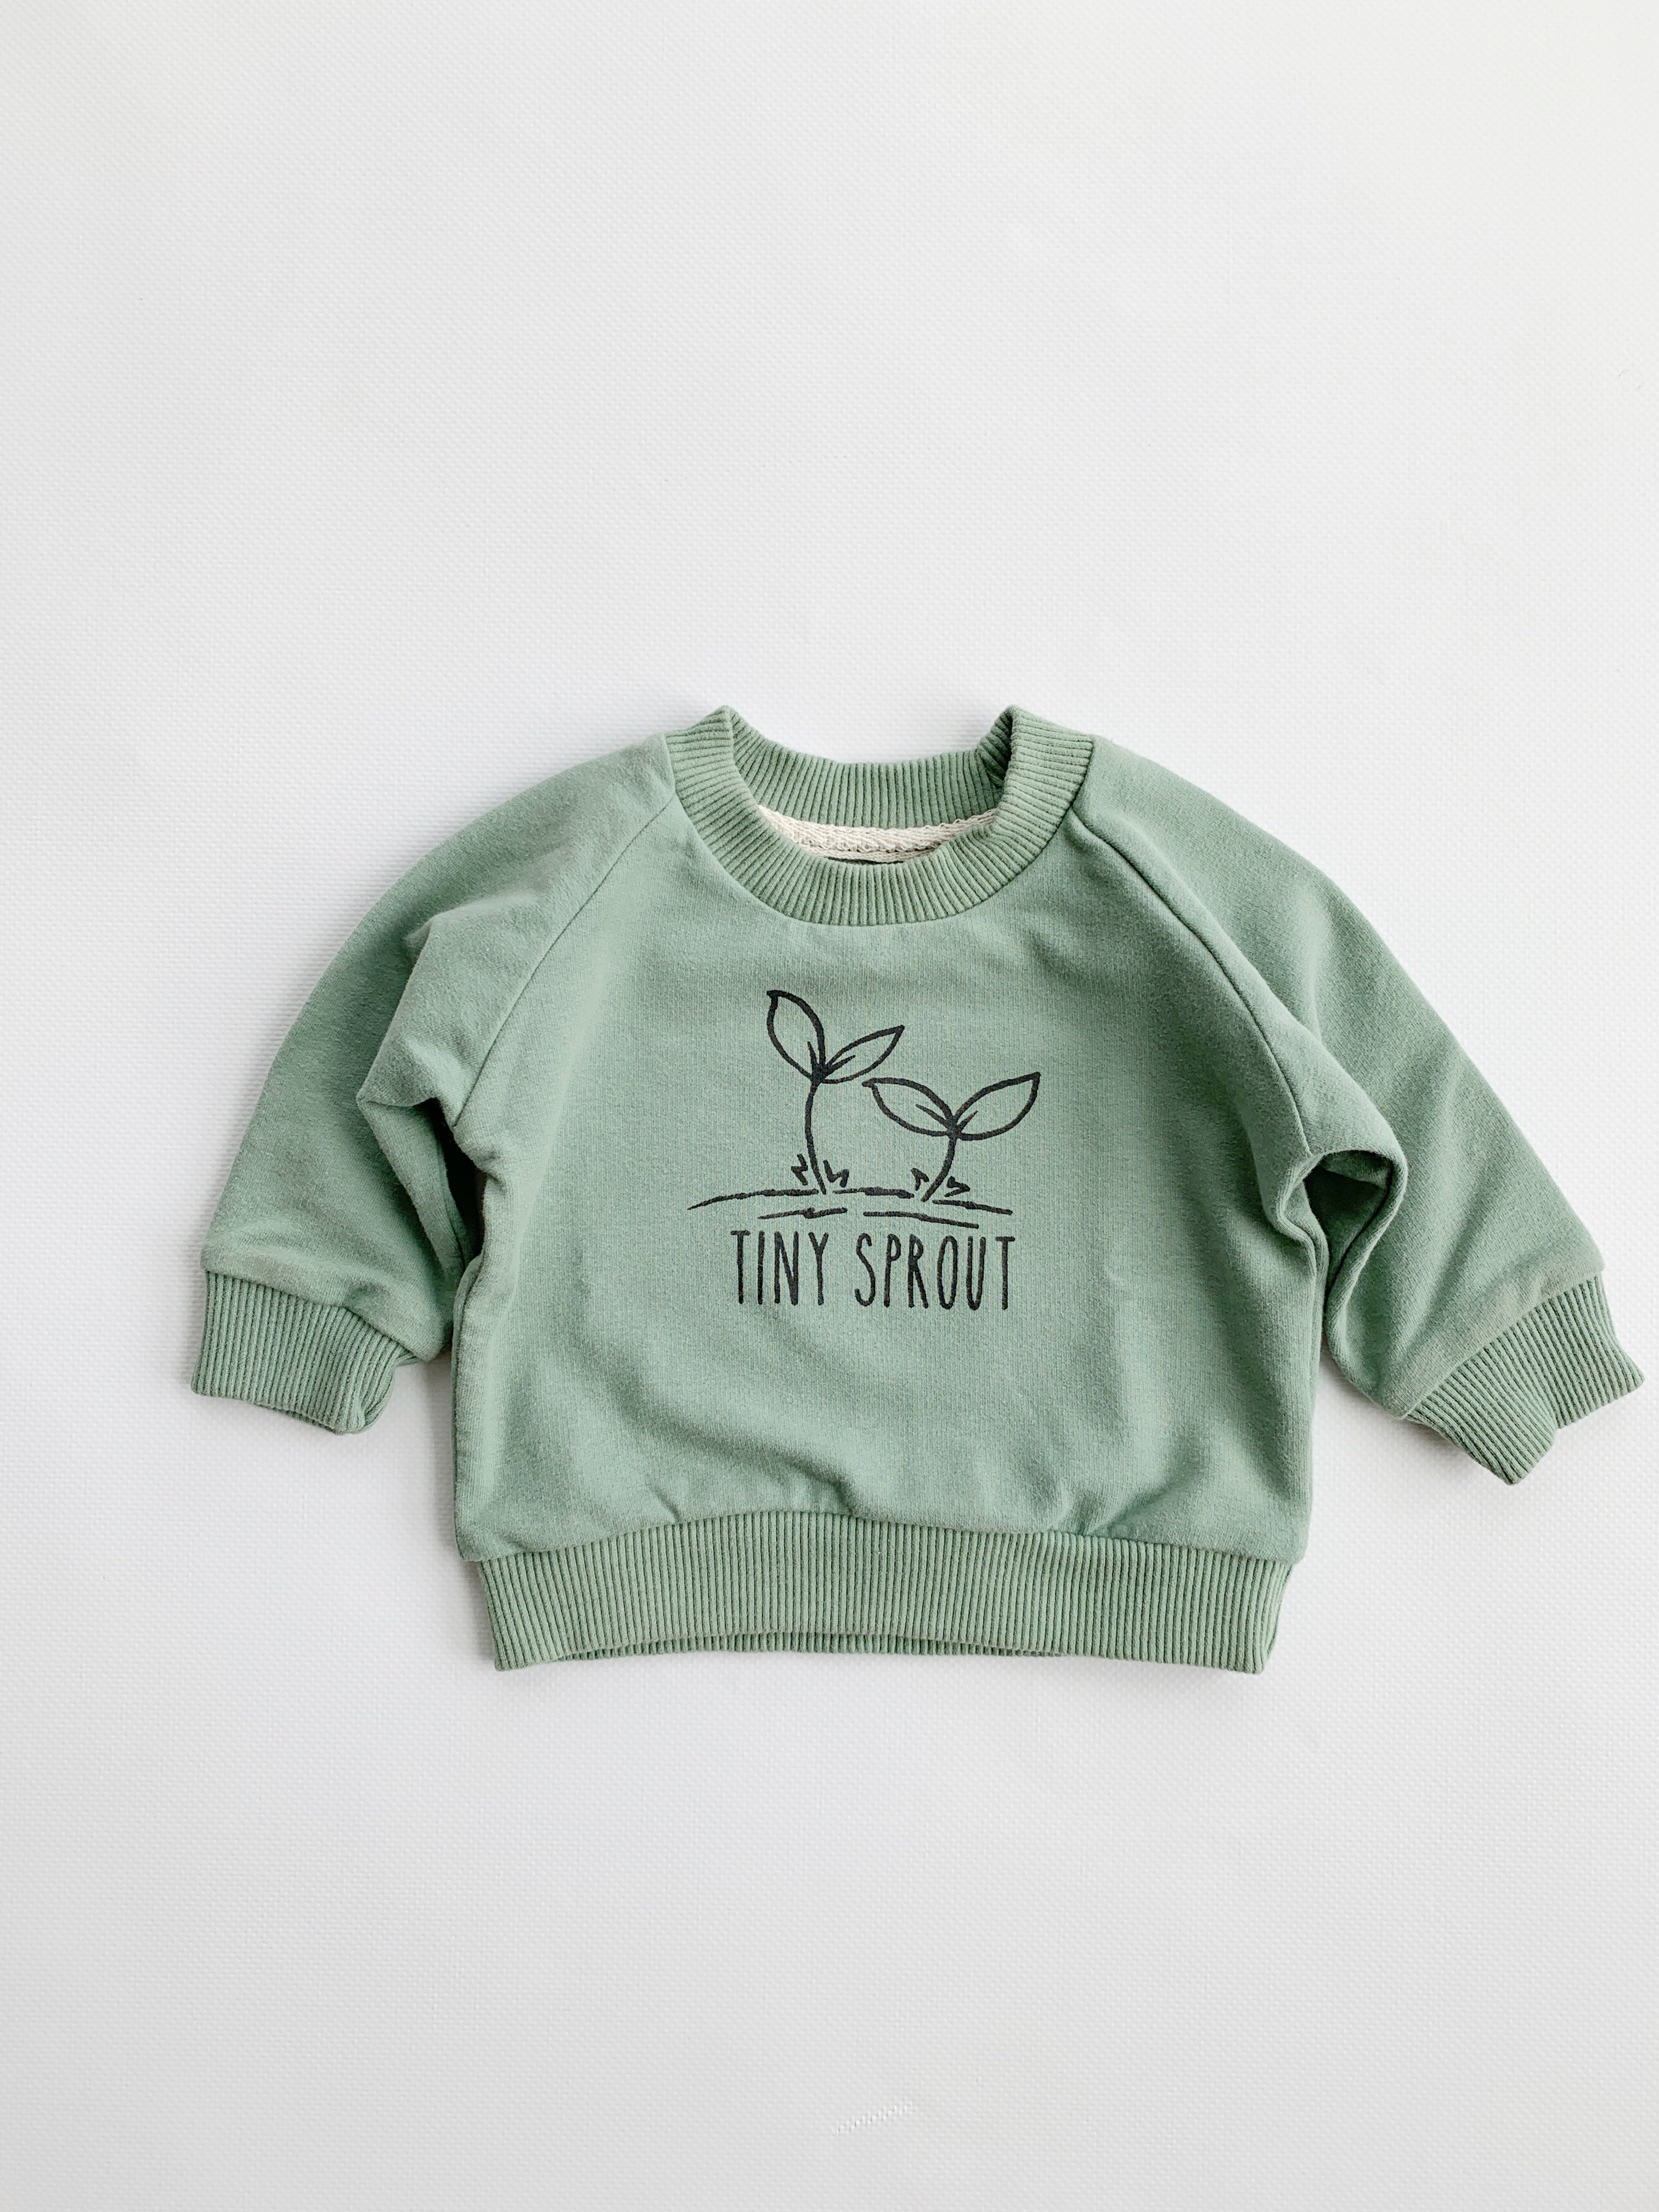 TINY SPROUT TOP